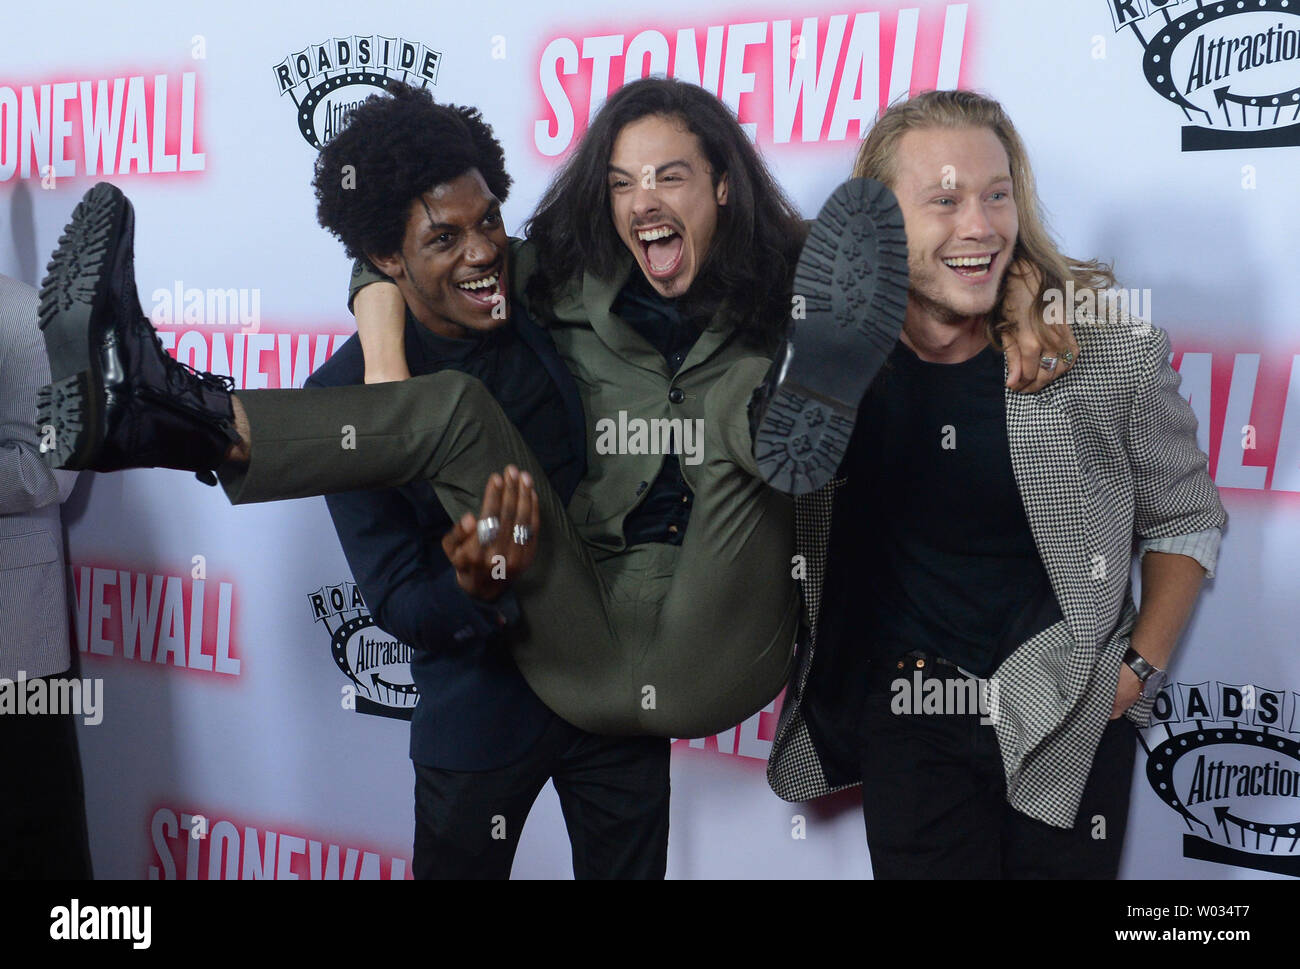 Cast members Vladimir Alexis, Jonny Beauchamp and Caleb Landry Jones (L-R)  attend the premiere of the motion picture drama "Stonewall" at the Pacific  Design Center in Los Angeles on September 23, 2015.